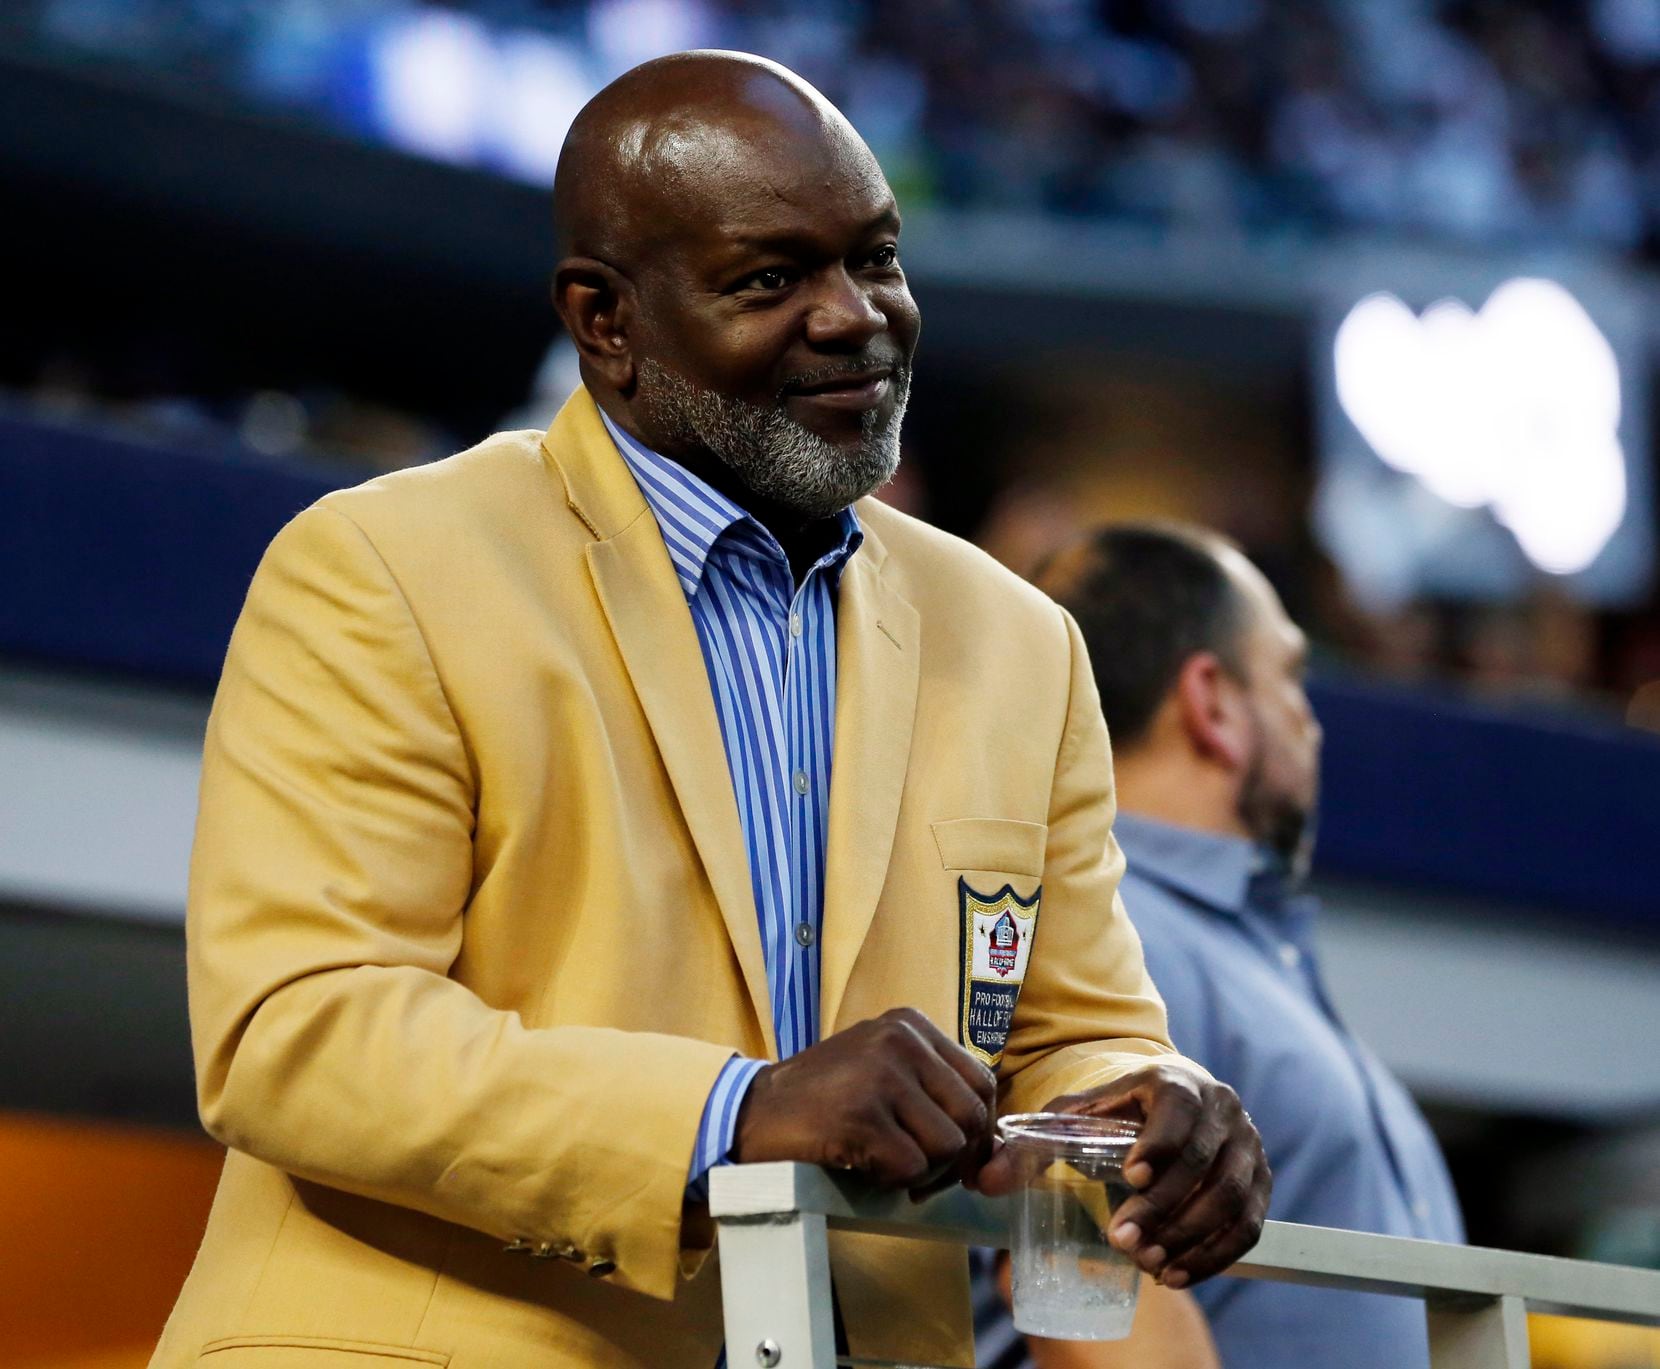 Former Dallas Cowboys running back Emmitt Smith watched a pregame workout from the stands before the game between the Dallas Cowboys and the Philadelphia Eagles at AT&T Stadium in Arlington on Monday.